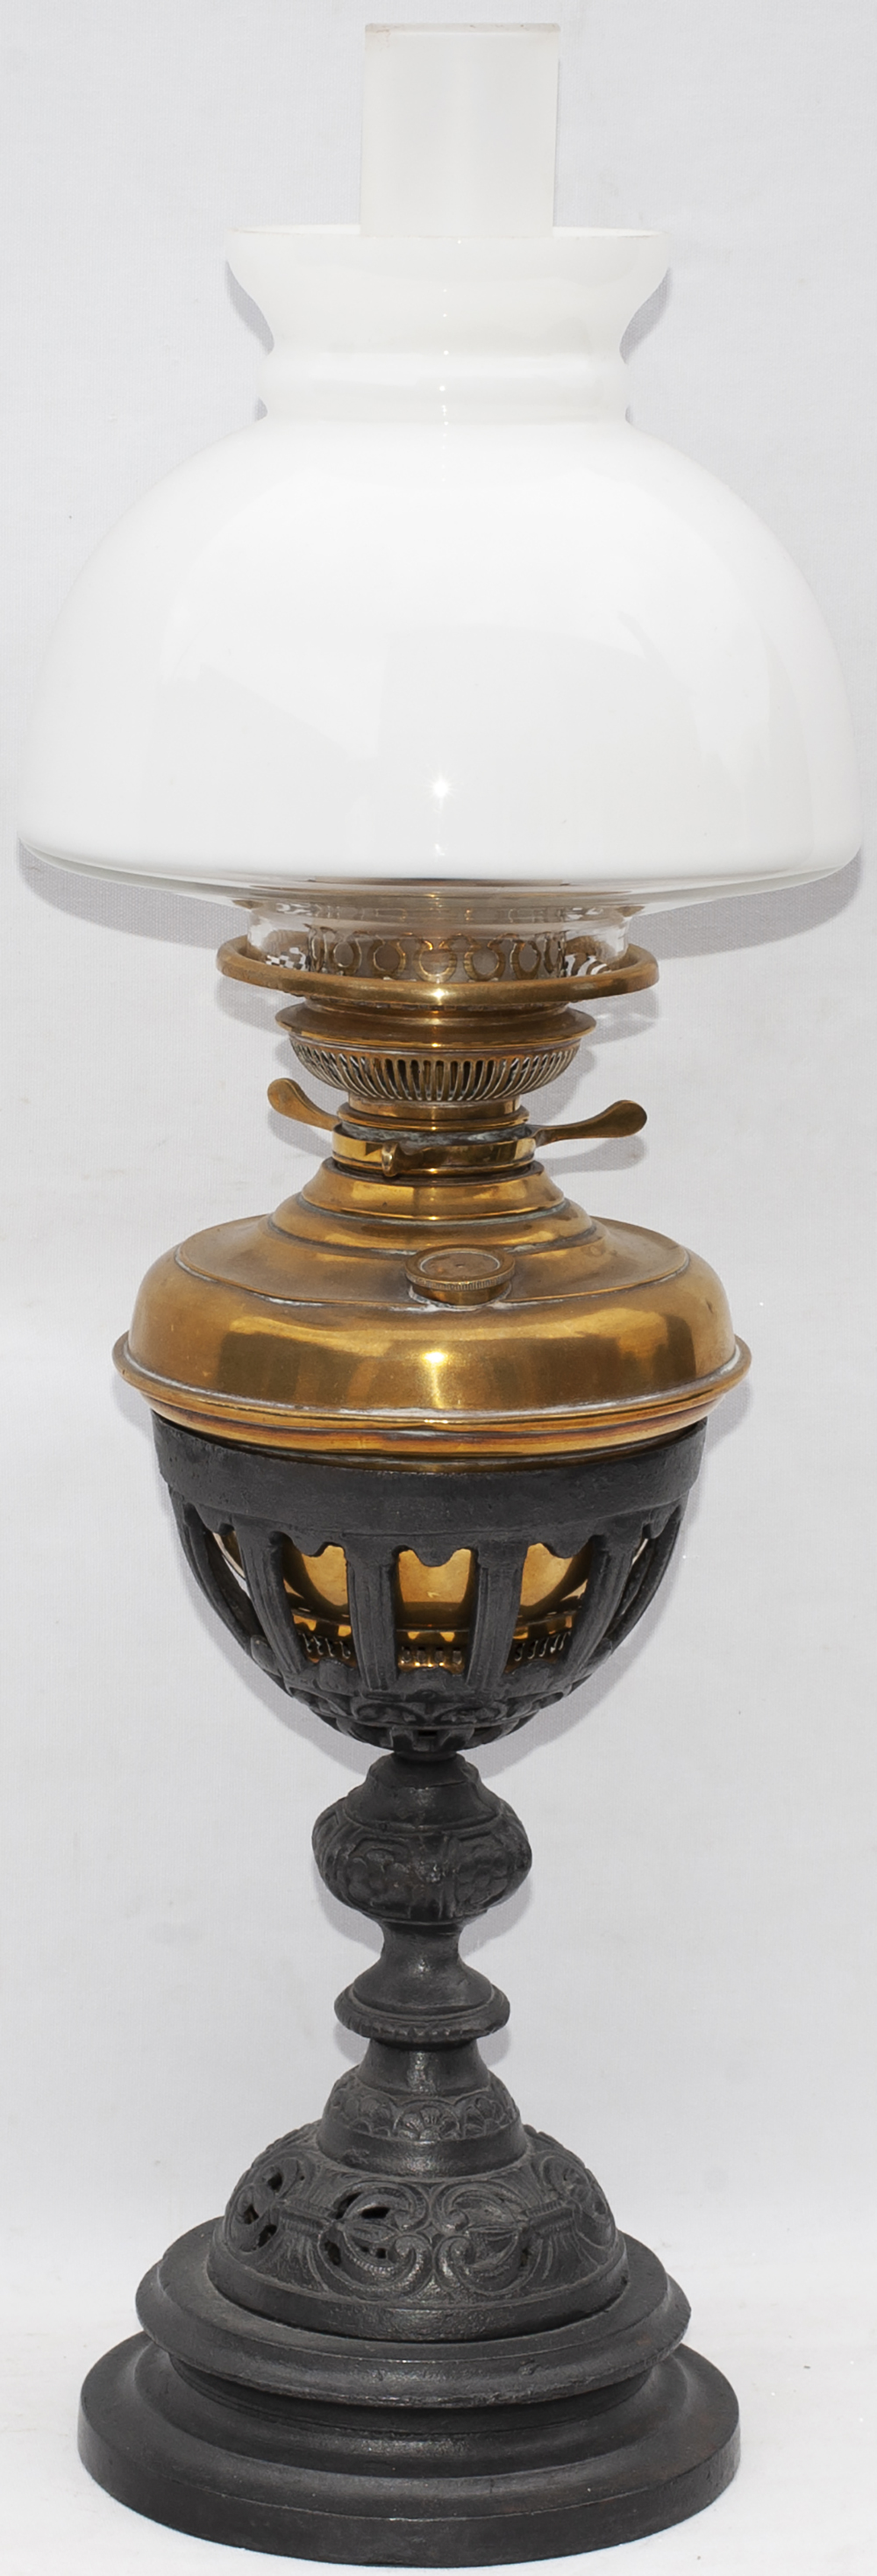 Great Western railway Table lamp complete with reservoir, burner, glass chimney, glass shade and